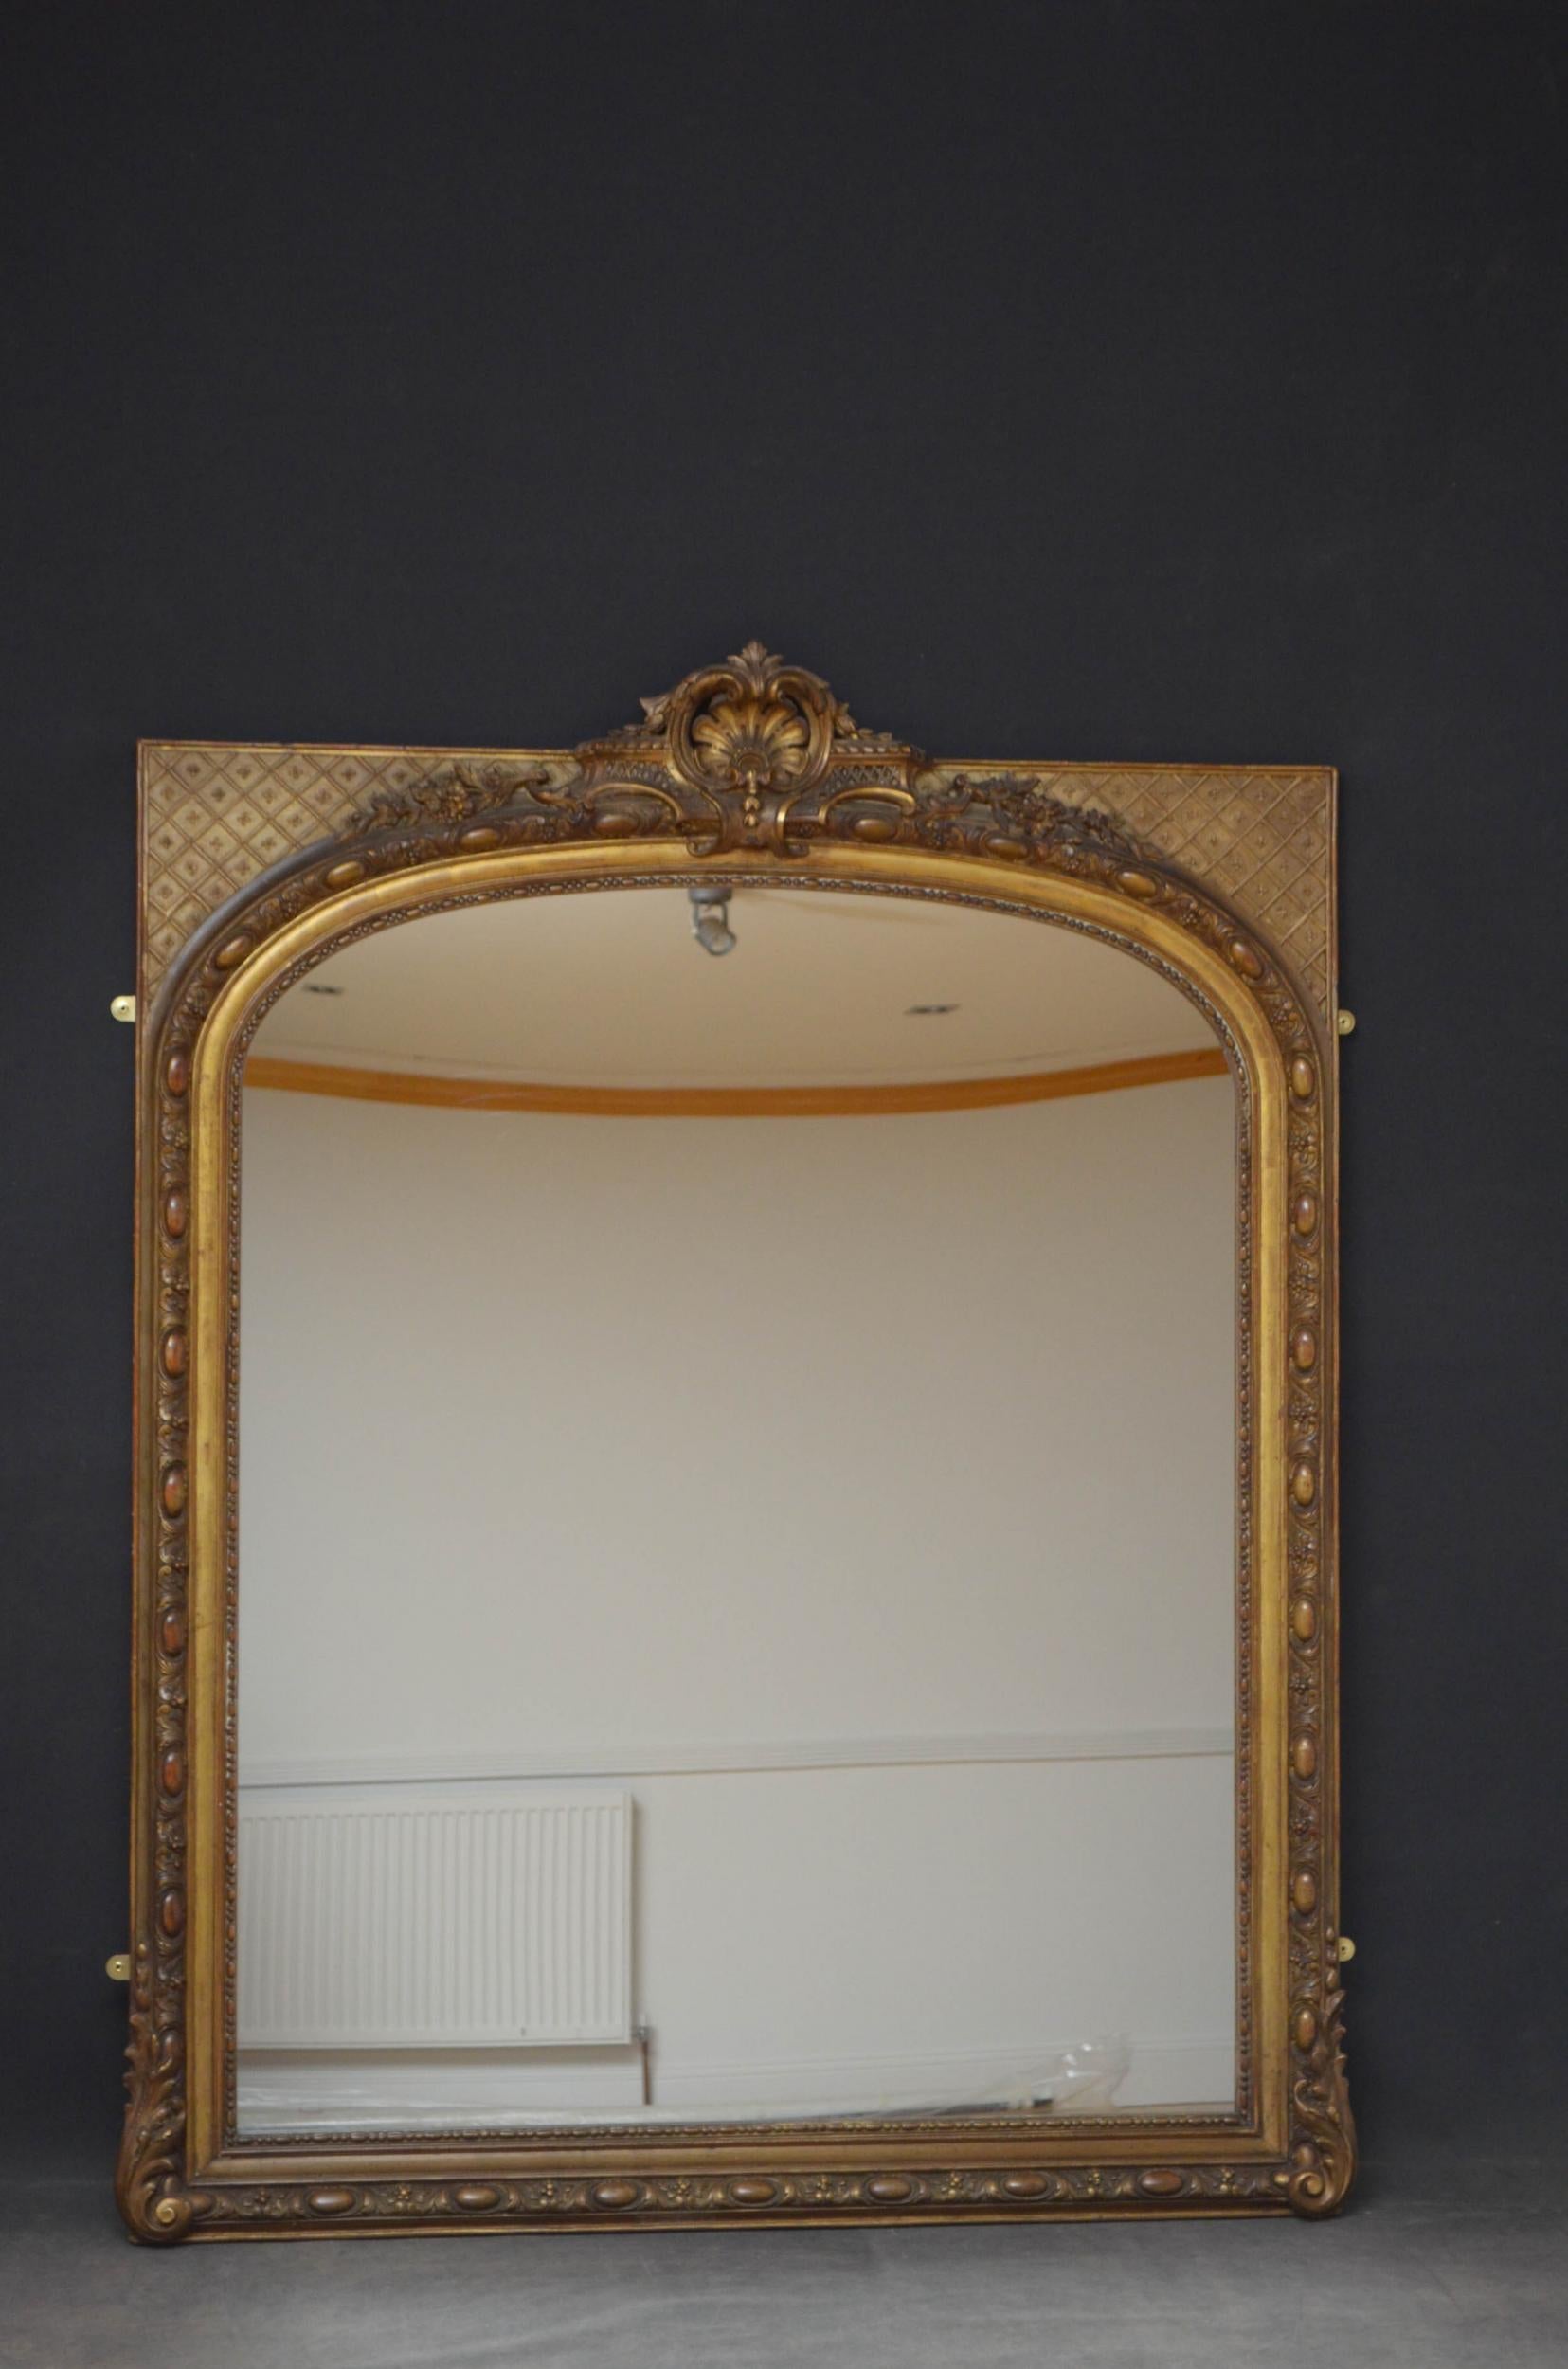 Sn4865 A large French giltwood wall mirror, having a replacement glass in beaded, gilded and painted frame with a foliage crest to the centre on symmetrical lattice work all flanked by leafy scrolls the the base. This antique mirror retains its